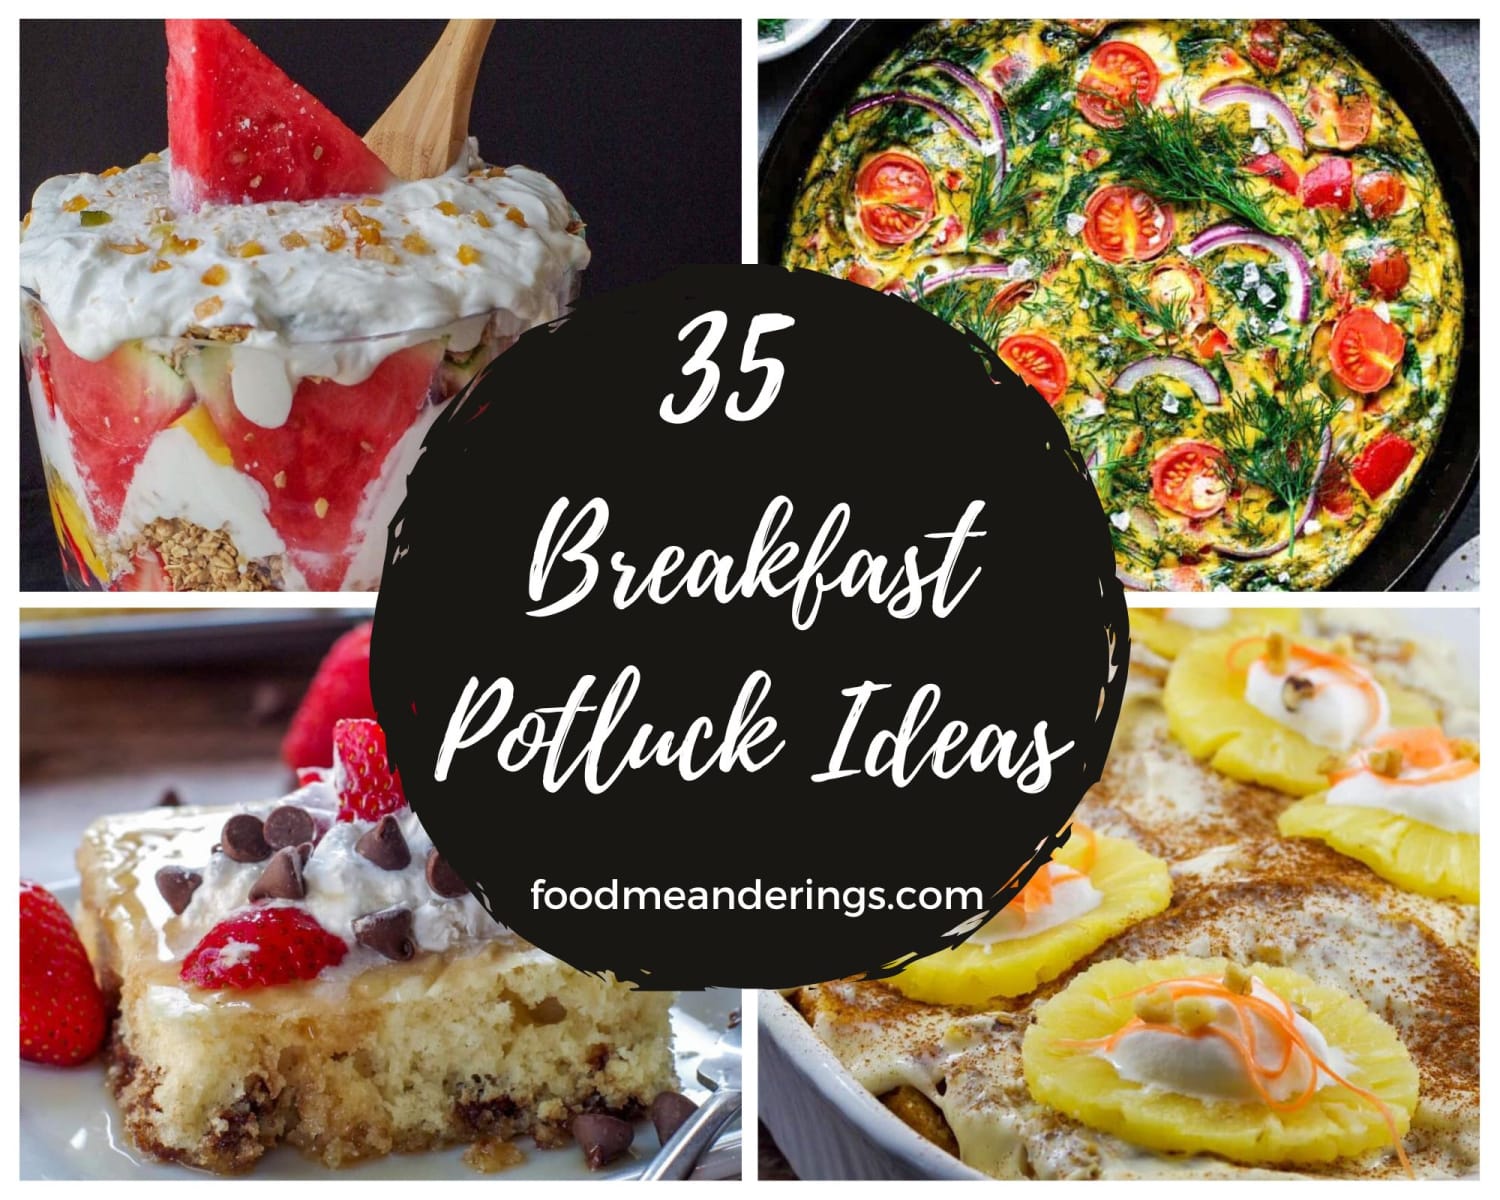 4 photos of breakfast potluck recipe ideas with white text on black circle in the middle